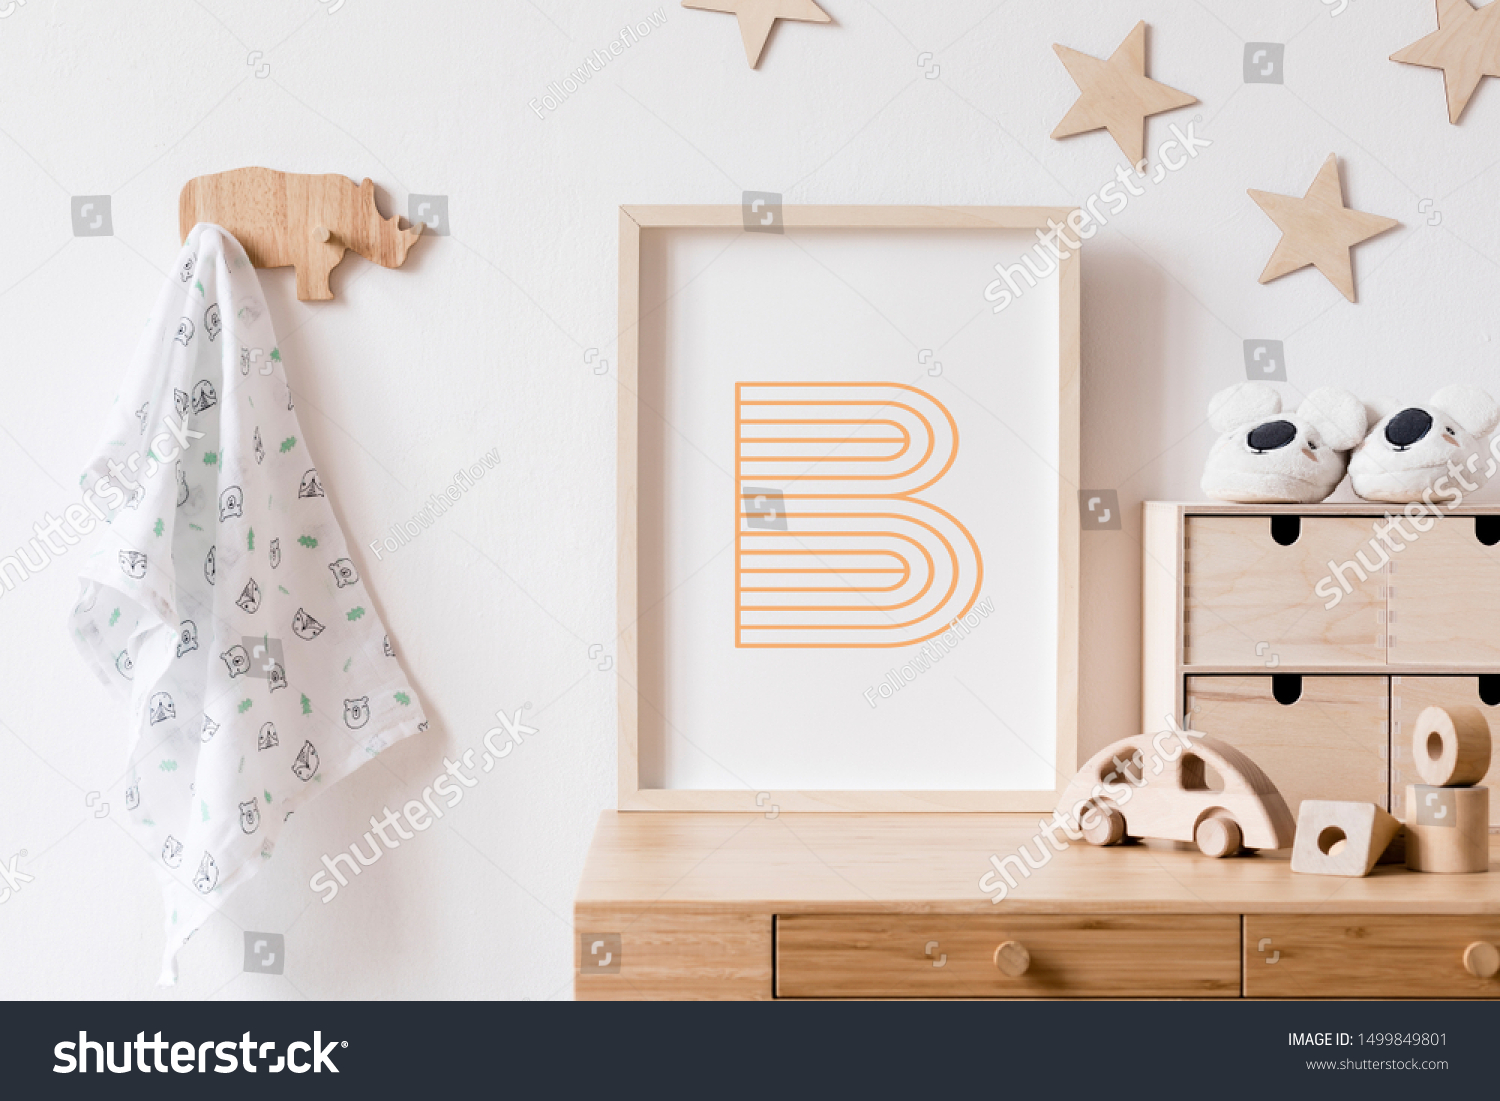 Stylish scandi childroom withwooden mock up photo frame, wooden toys, boxes, blocks and accessories Stars pattern on the background wall. Bright and sunny interior with wooden desk. Home decor. #1499849801